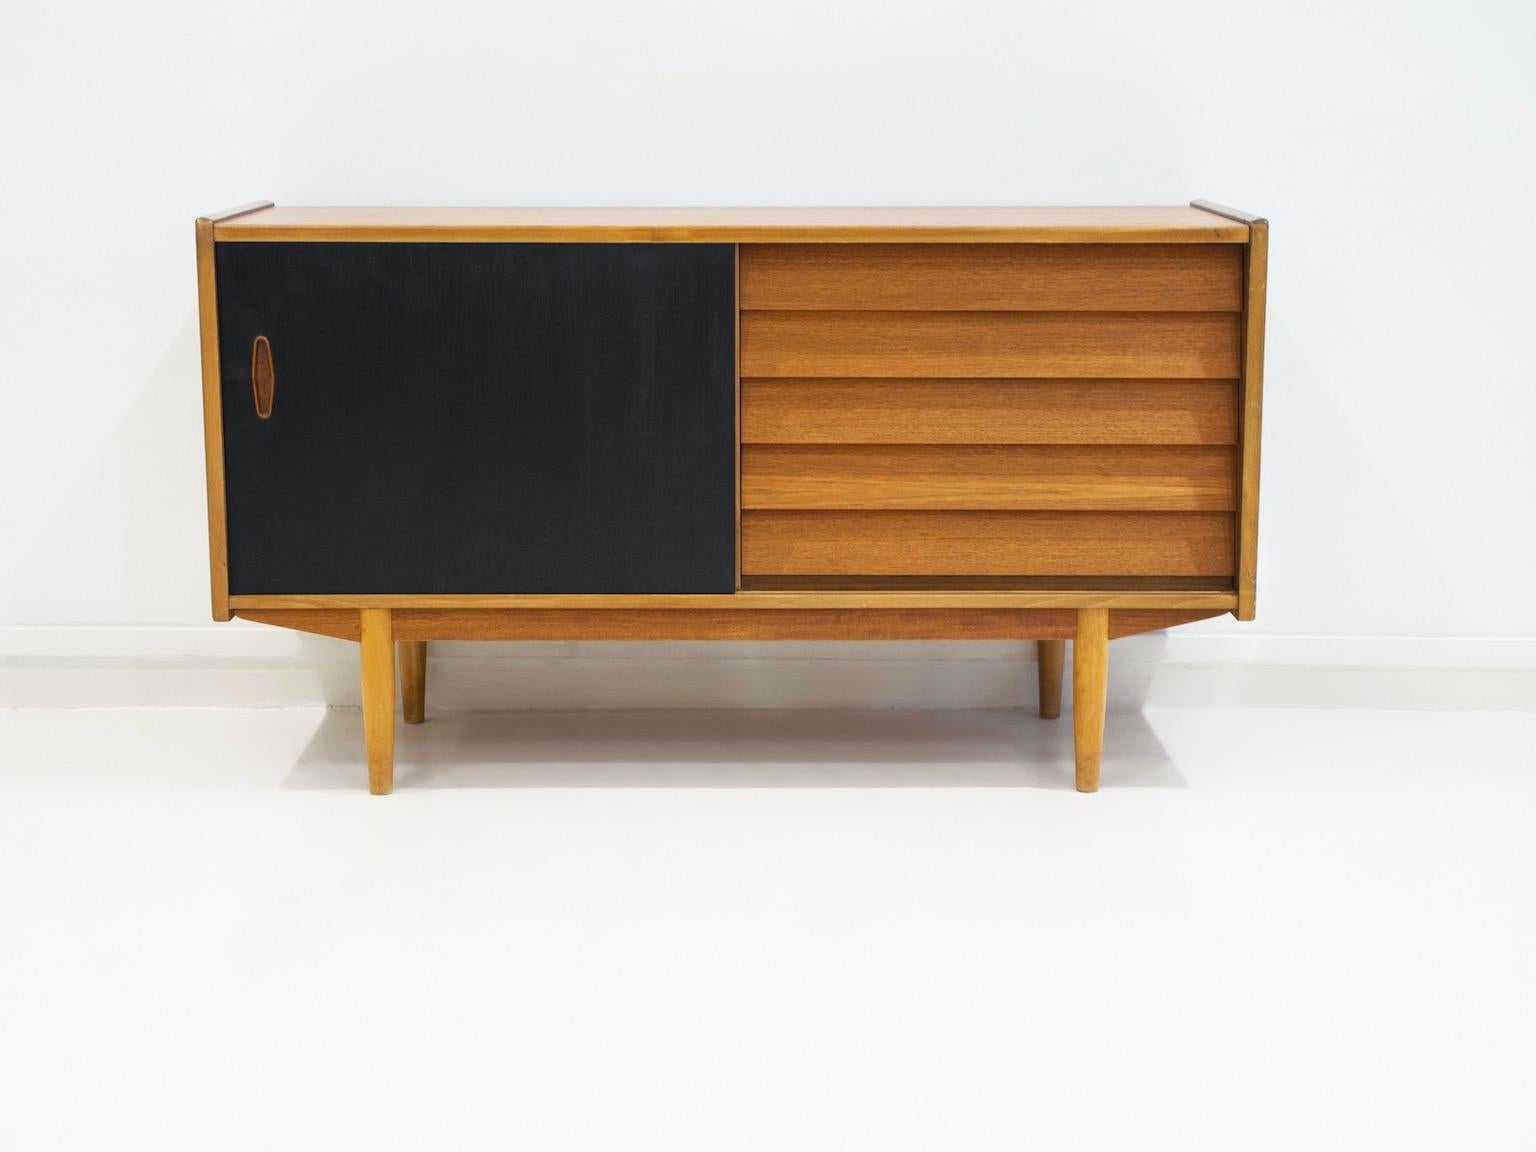 Teak sideboard with five drawers and a sliding door behind which is a storage compartment with a shelf. Manufactured by Hugo Troeds. Sliding door painted black at a later date.